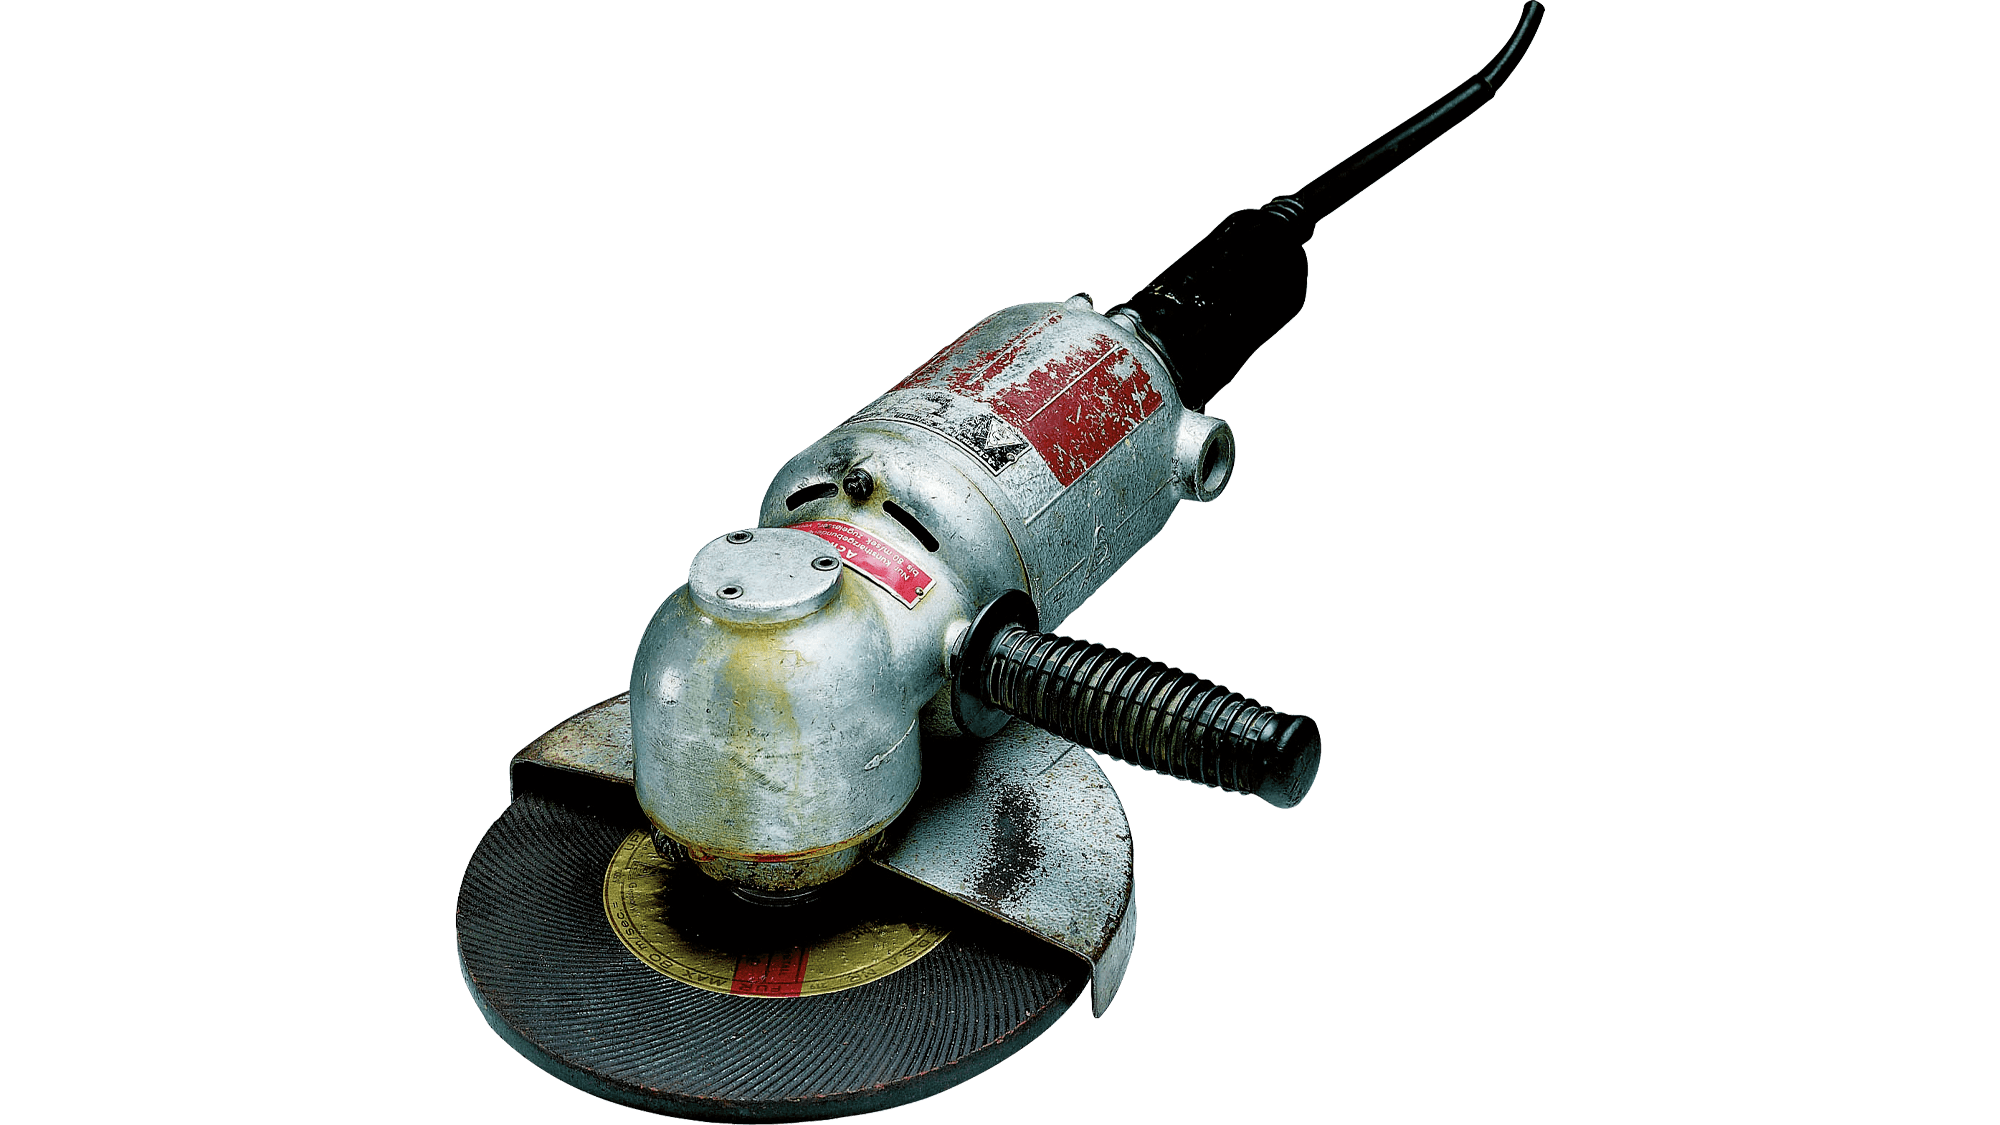 The world's first high-speed angle grinder